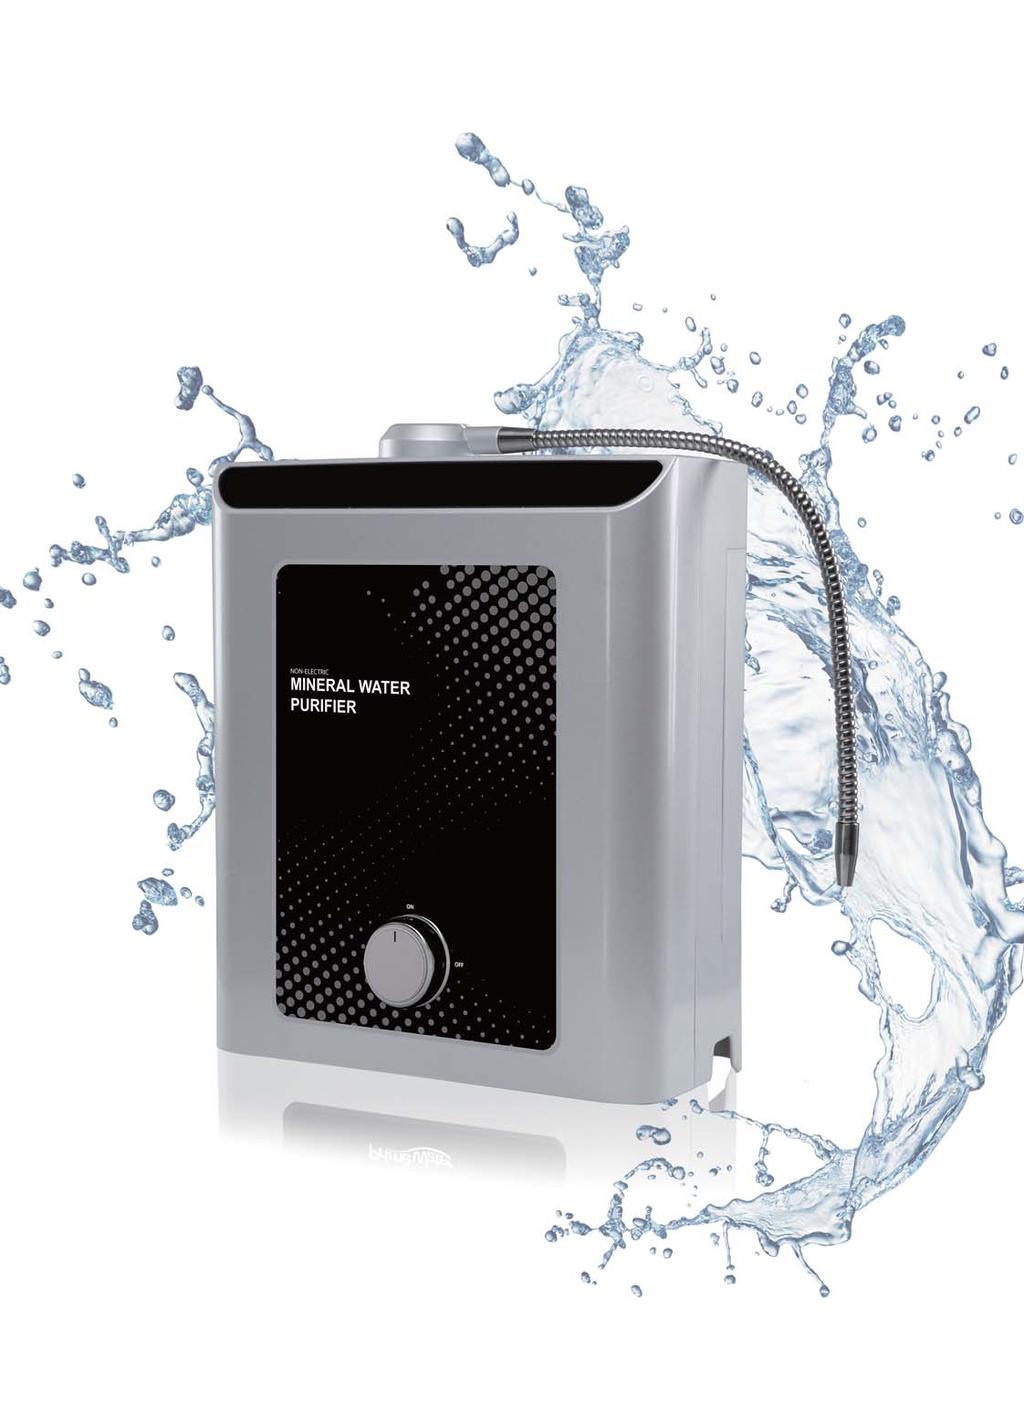 The Industry Leader in Alkaline Water Ionizer Technology NON-ELECTRIC MINERAL WATER PURIFIER NON-ELECTRIC MINERAL WATER